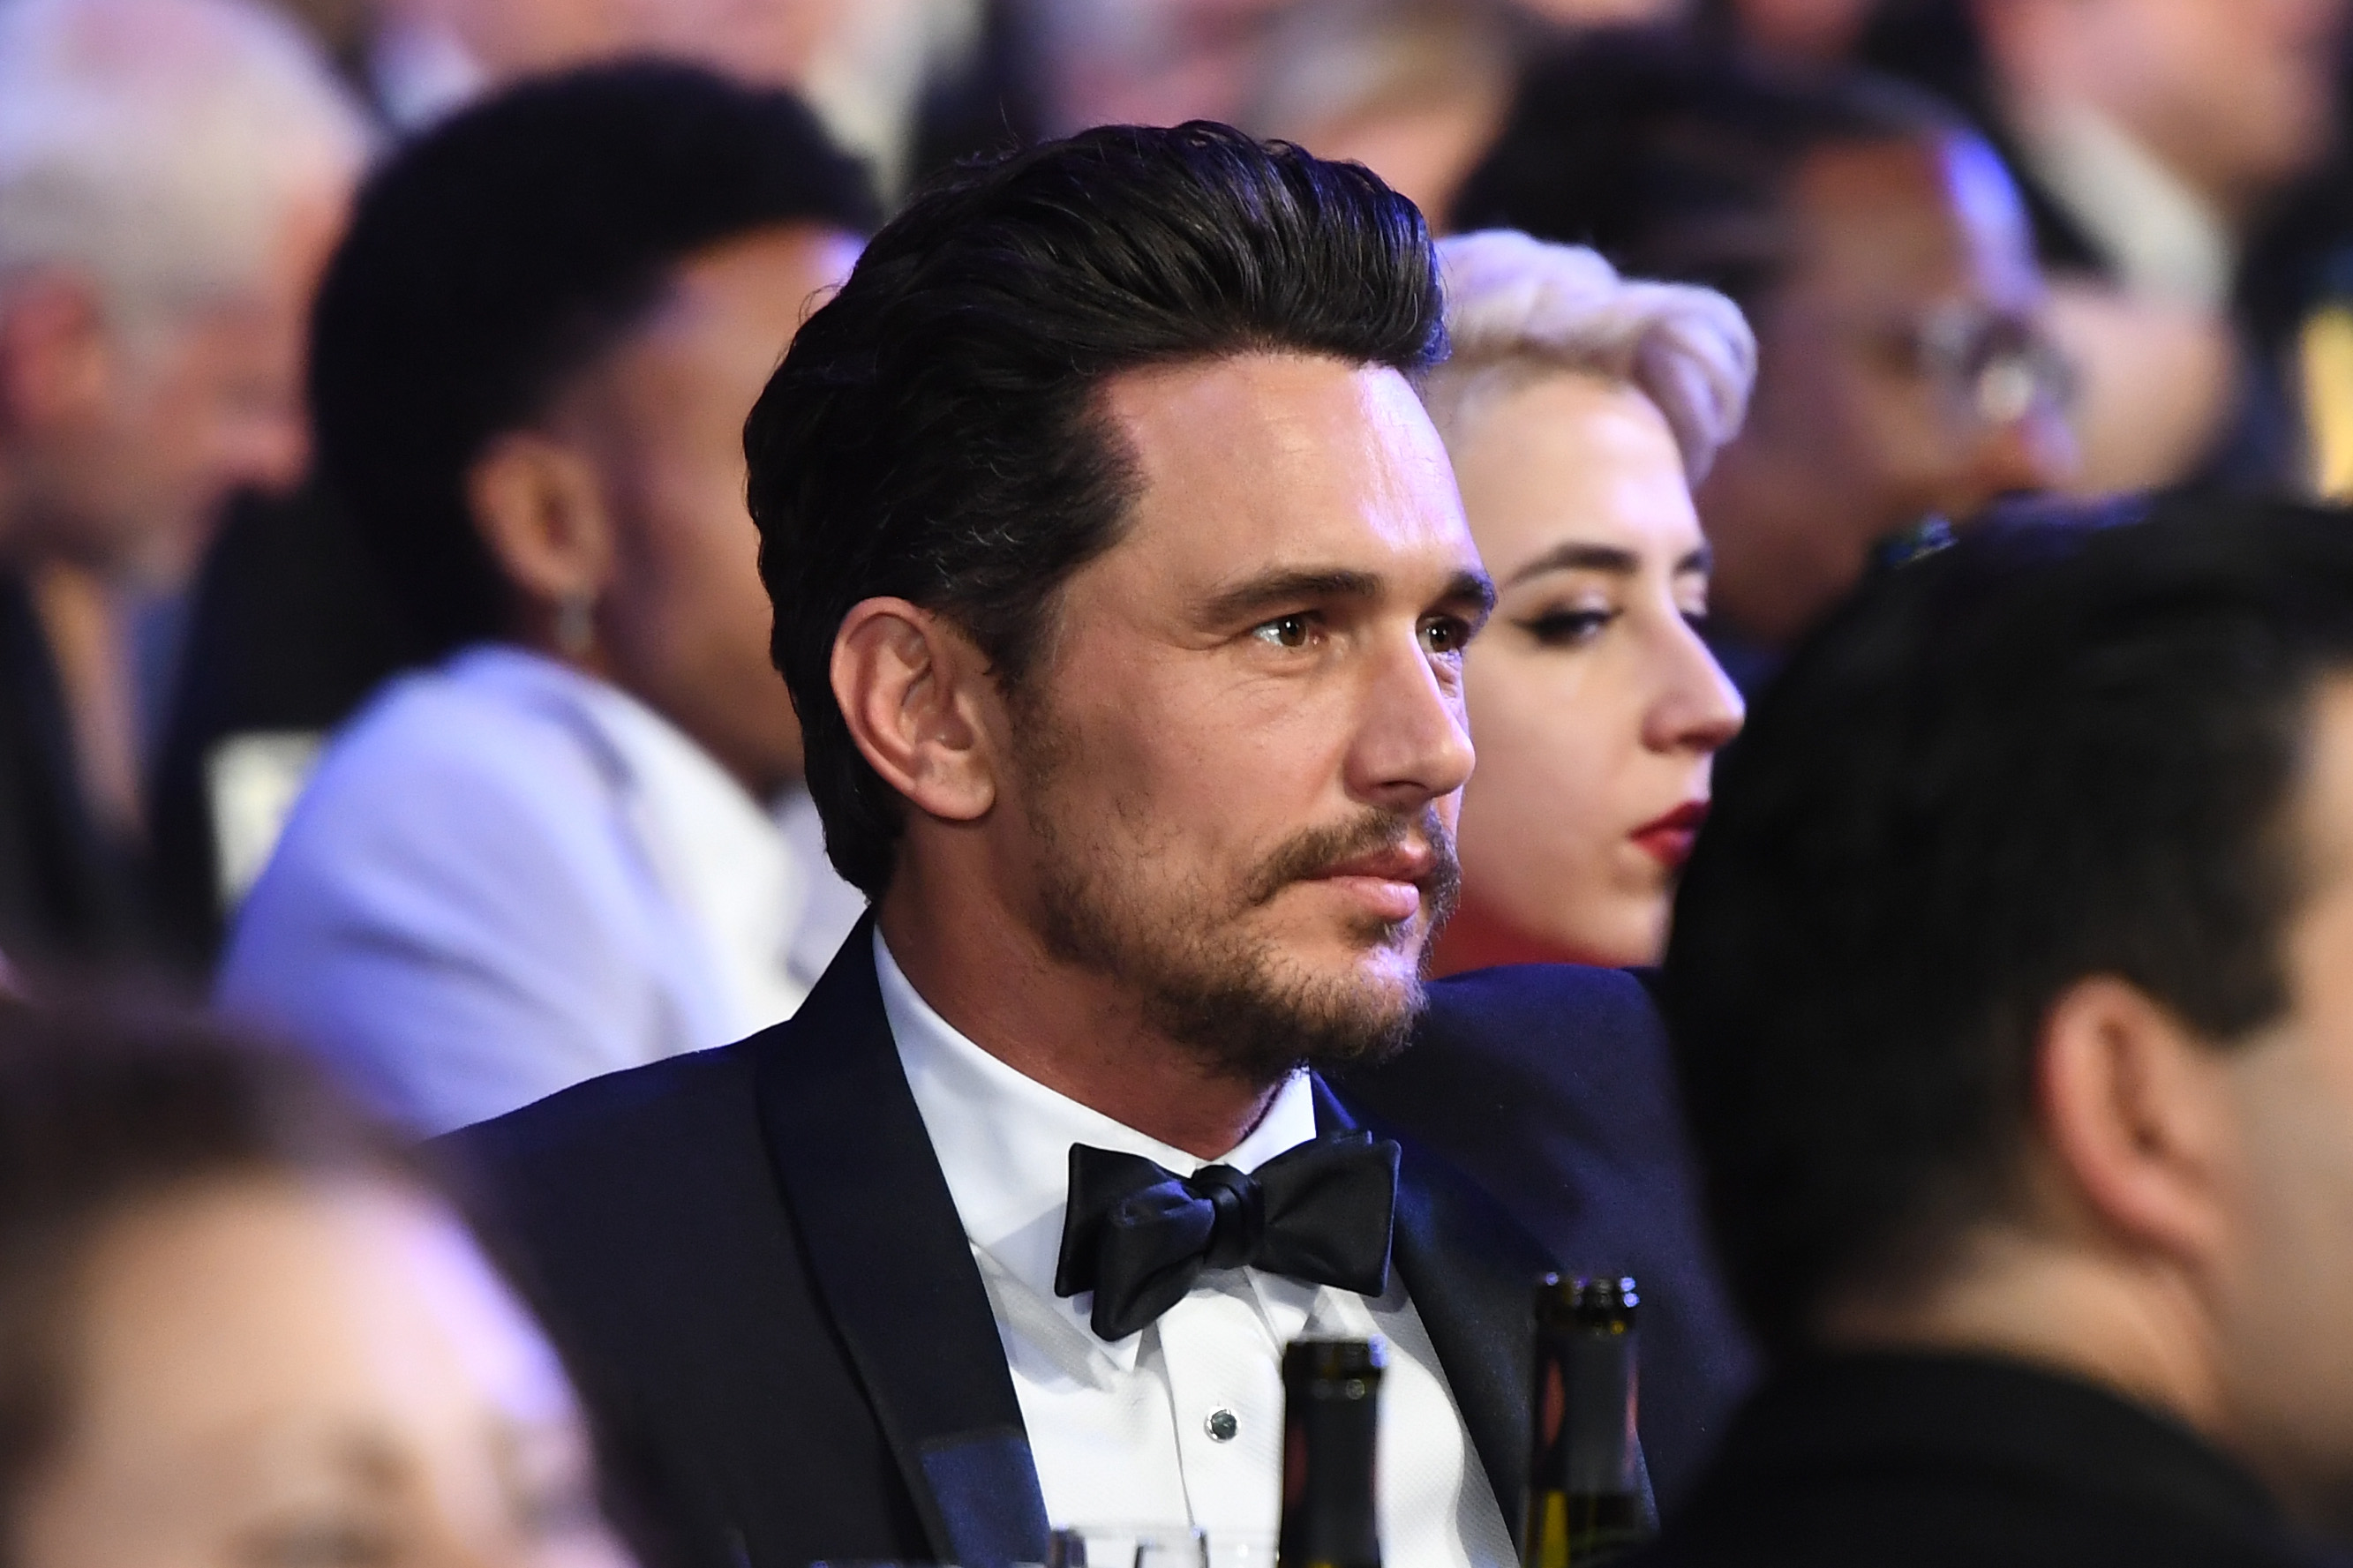 James Franco Accused of Sexual Misconduct and Exploitative Behavior by Five Women